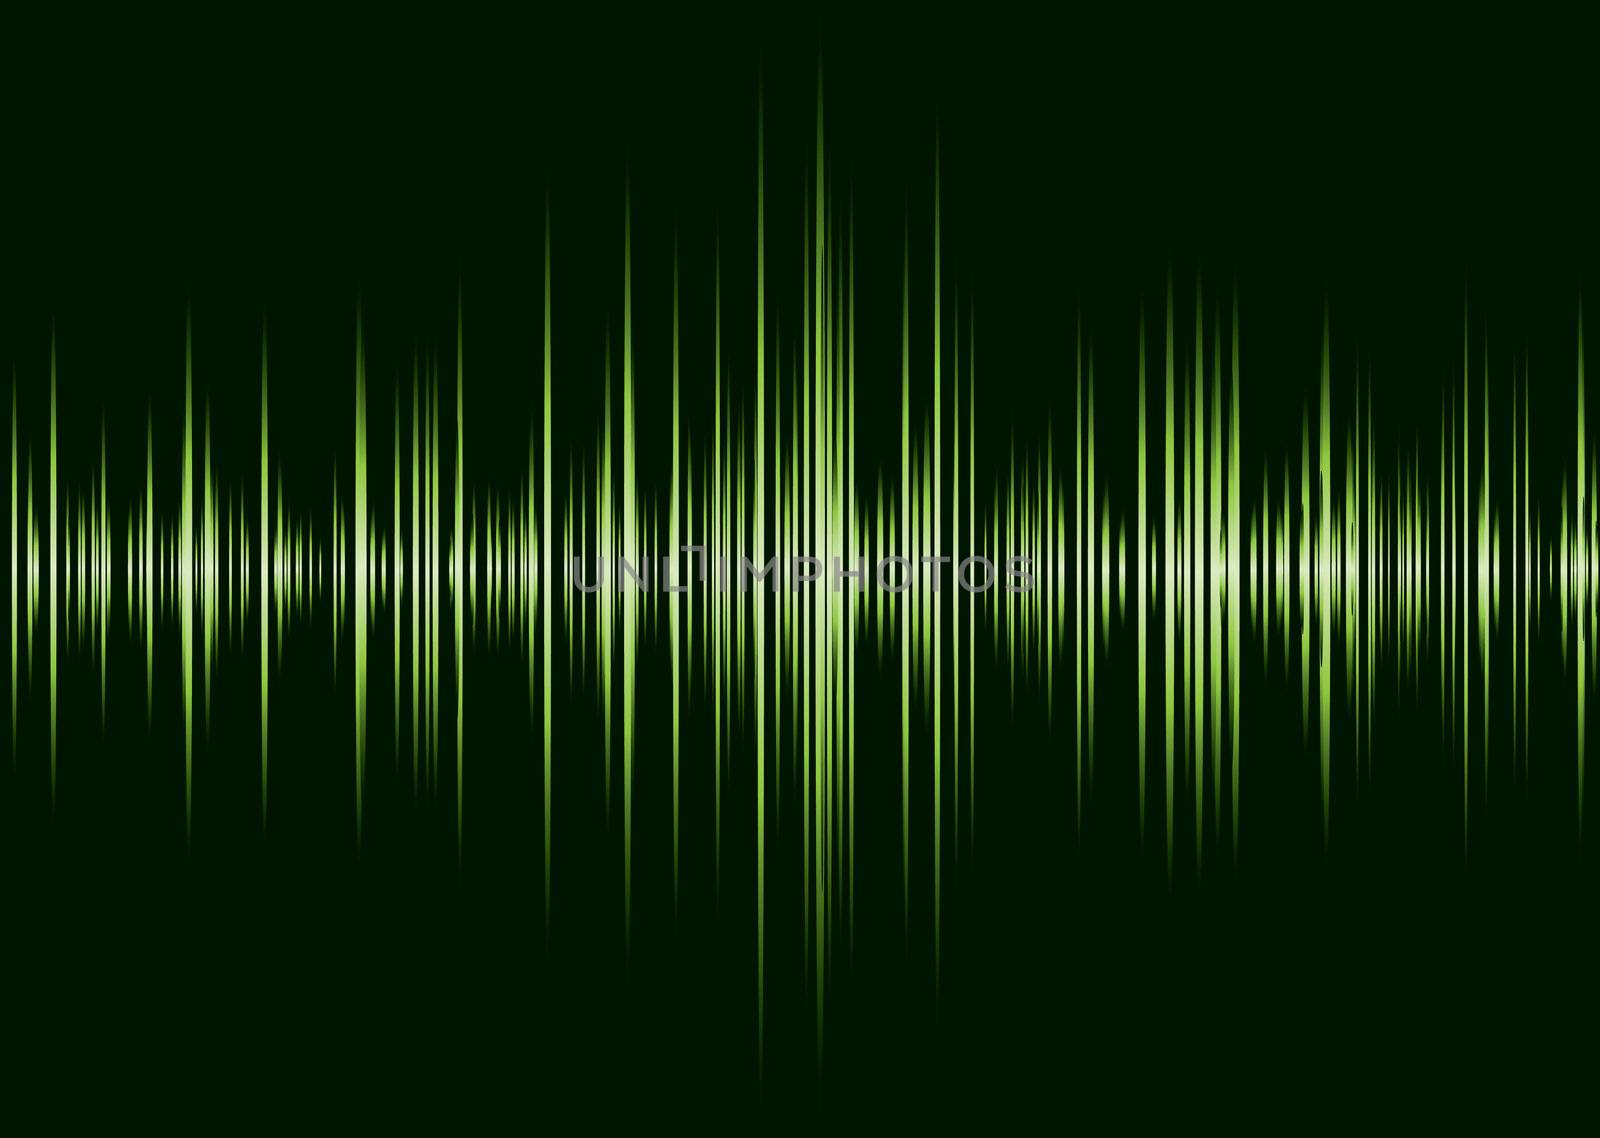 Black and green music inspire graphic equalizer wave and black background